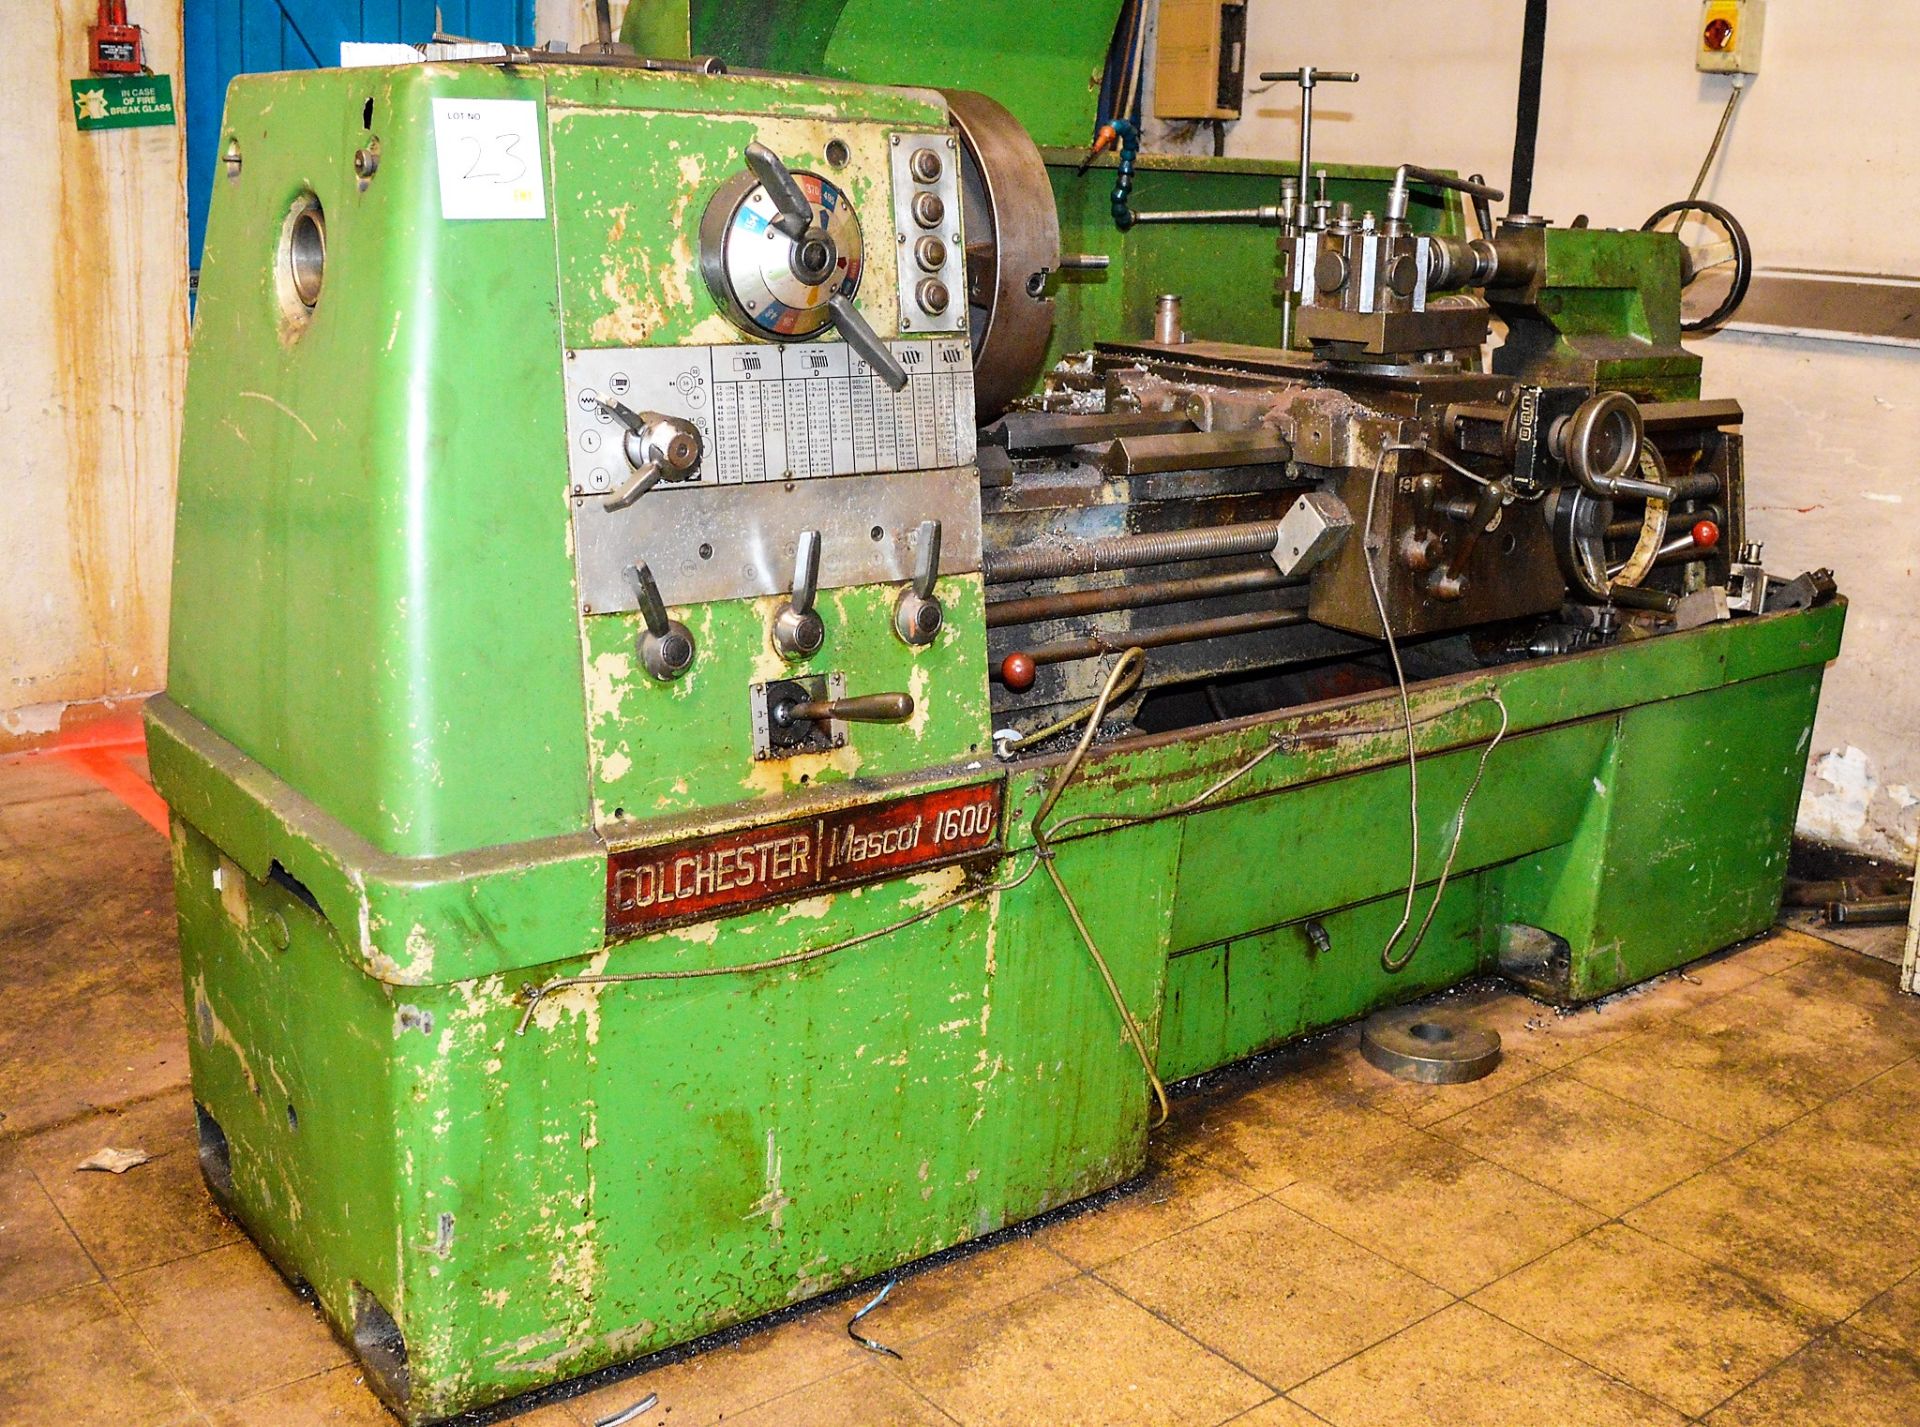 Colchester Mascot 1600 gap bed centre lathe S/N: 7/0001/05950 Swing in gap 11 inch by 42 inch